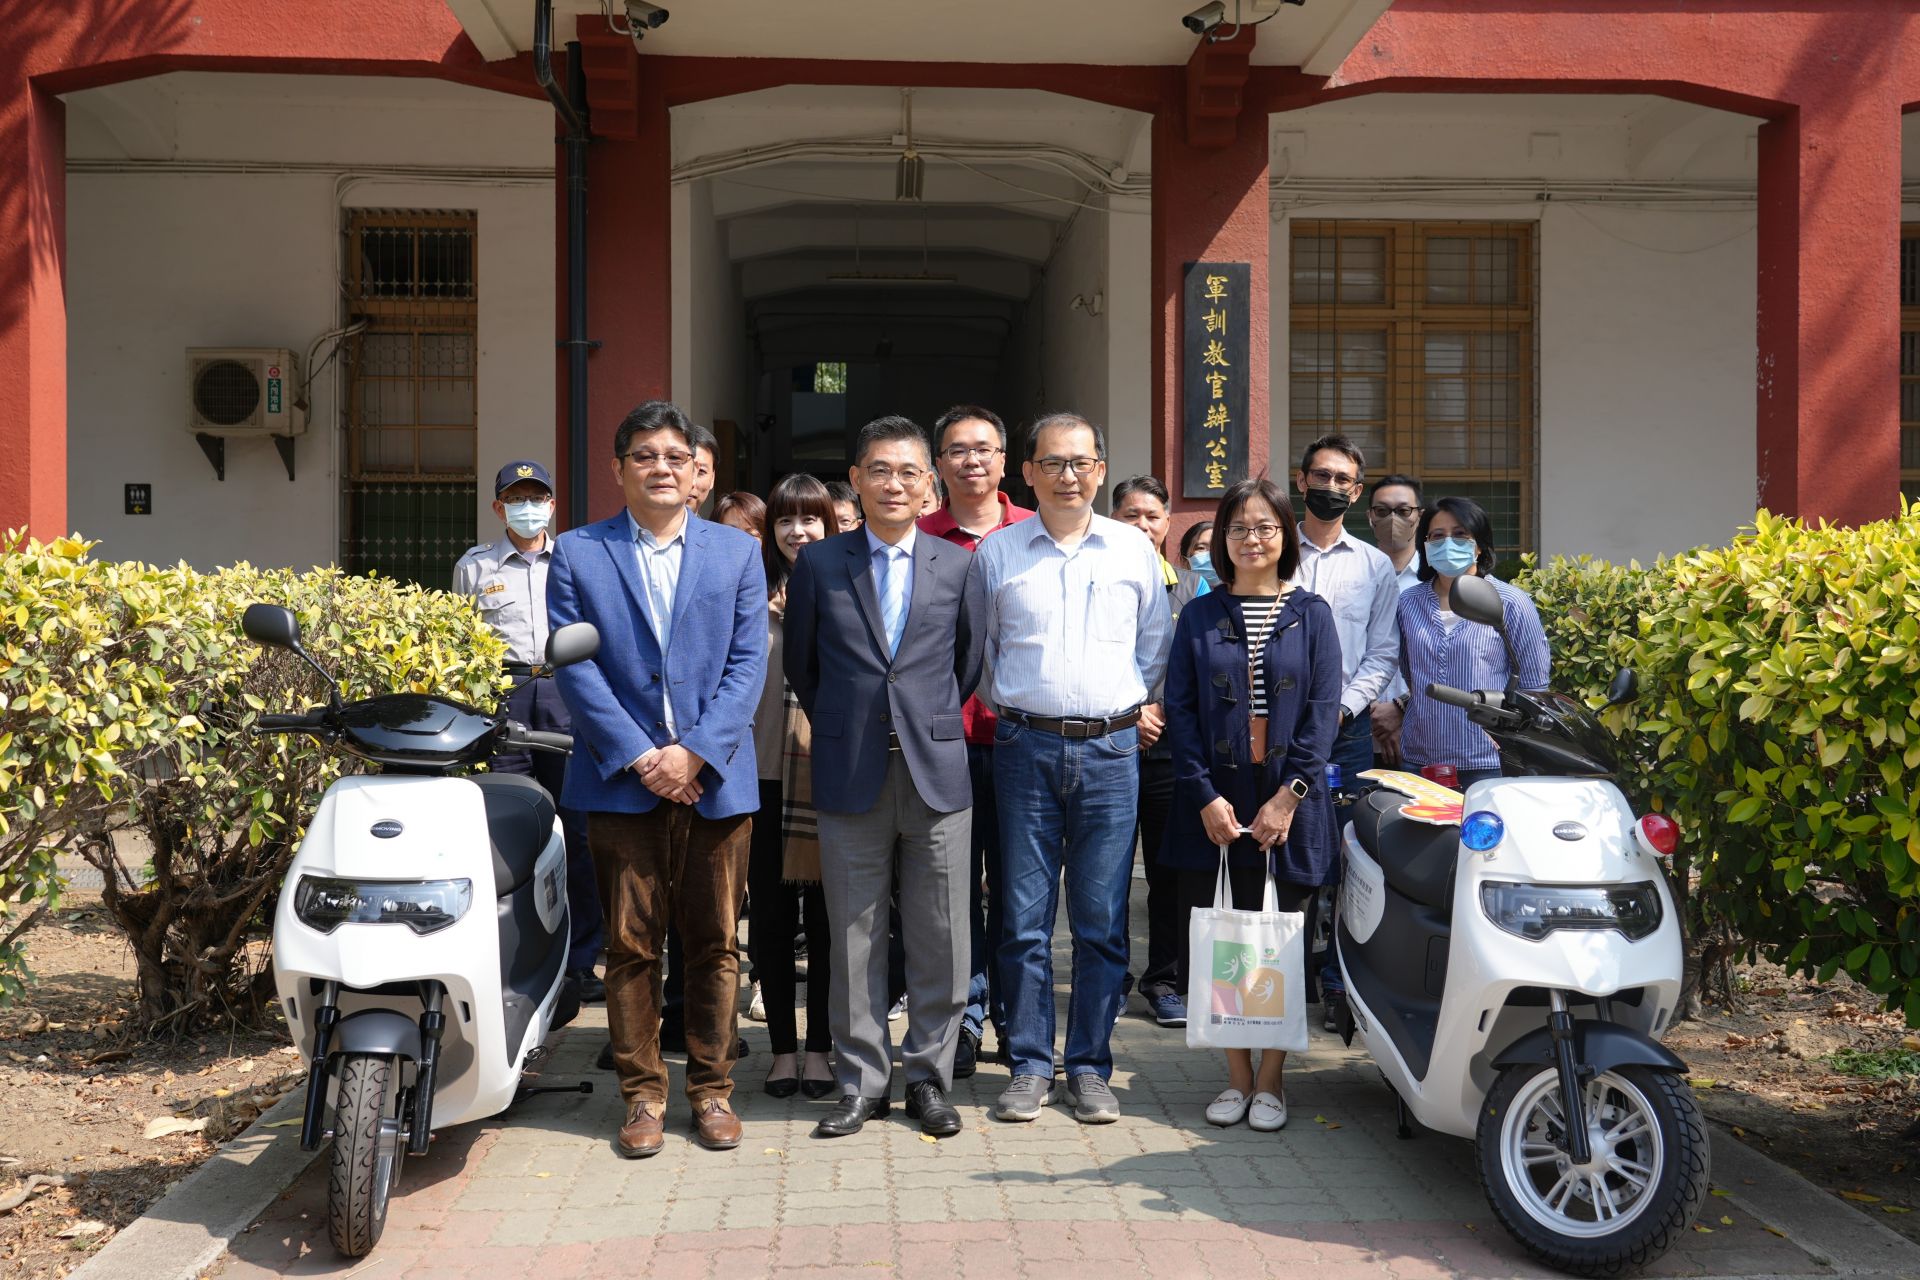 【Sustainable Campus】NCKU’s 2nd Batch of Electric Motorcycles are On Board Today